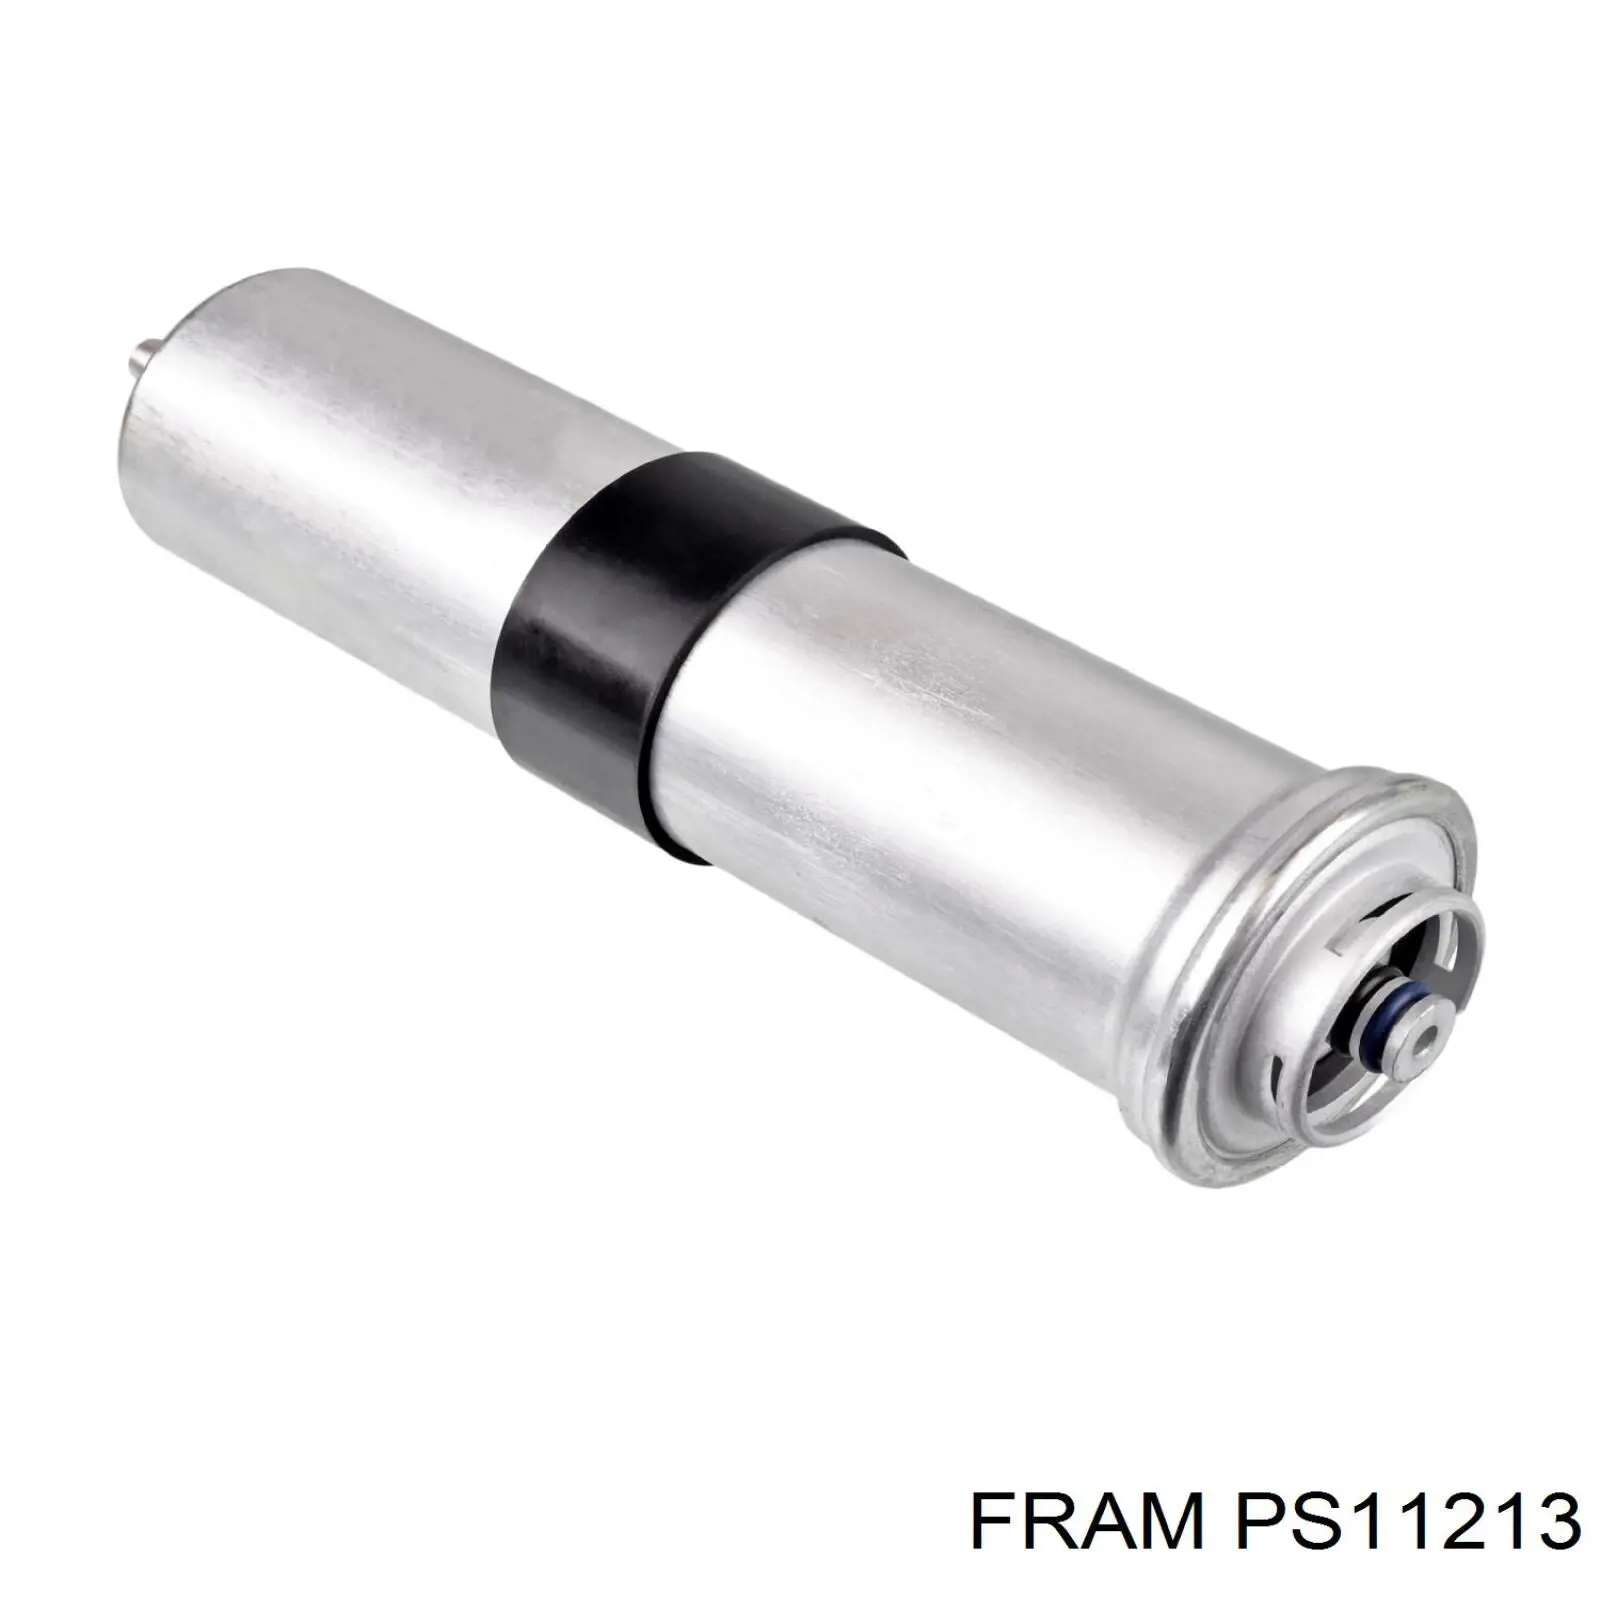 PS11213 Fram filtro combustible